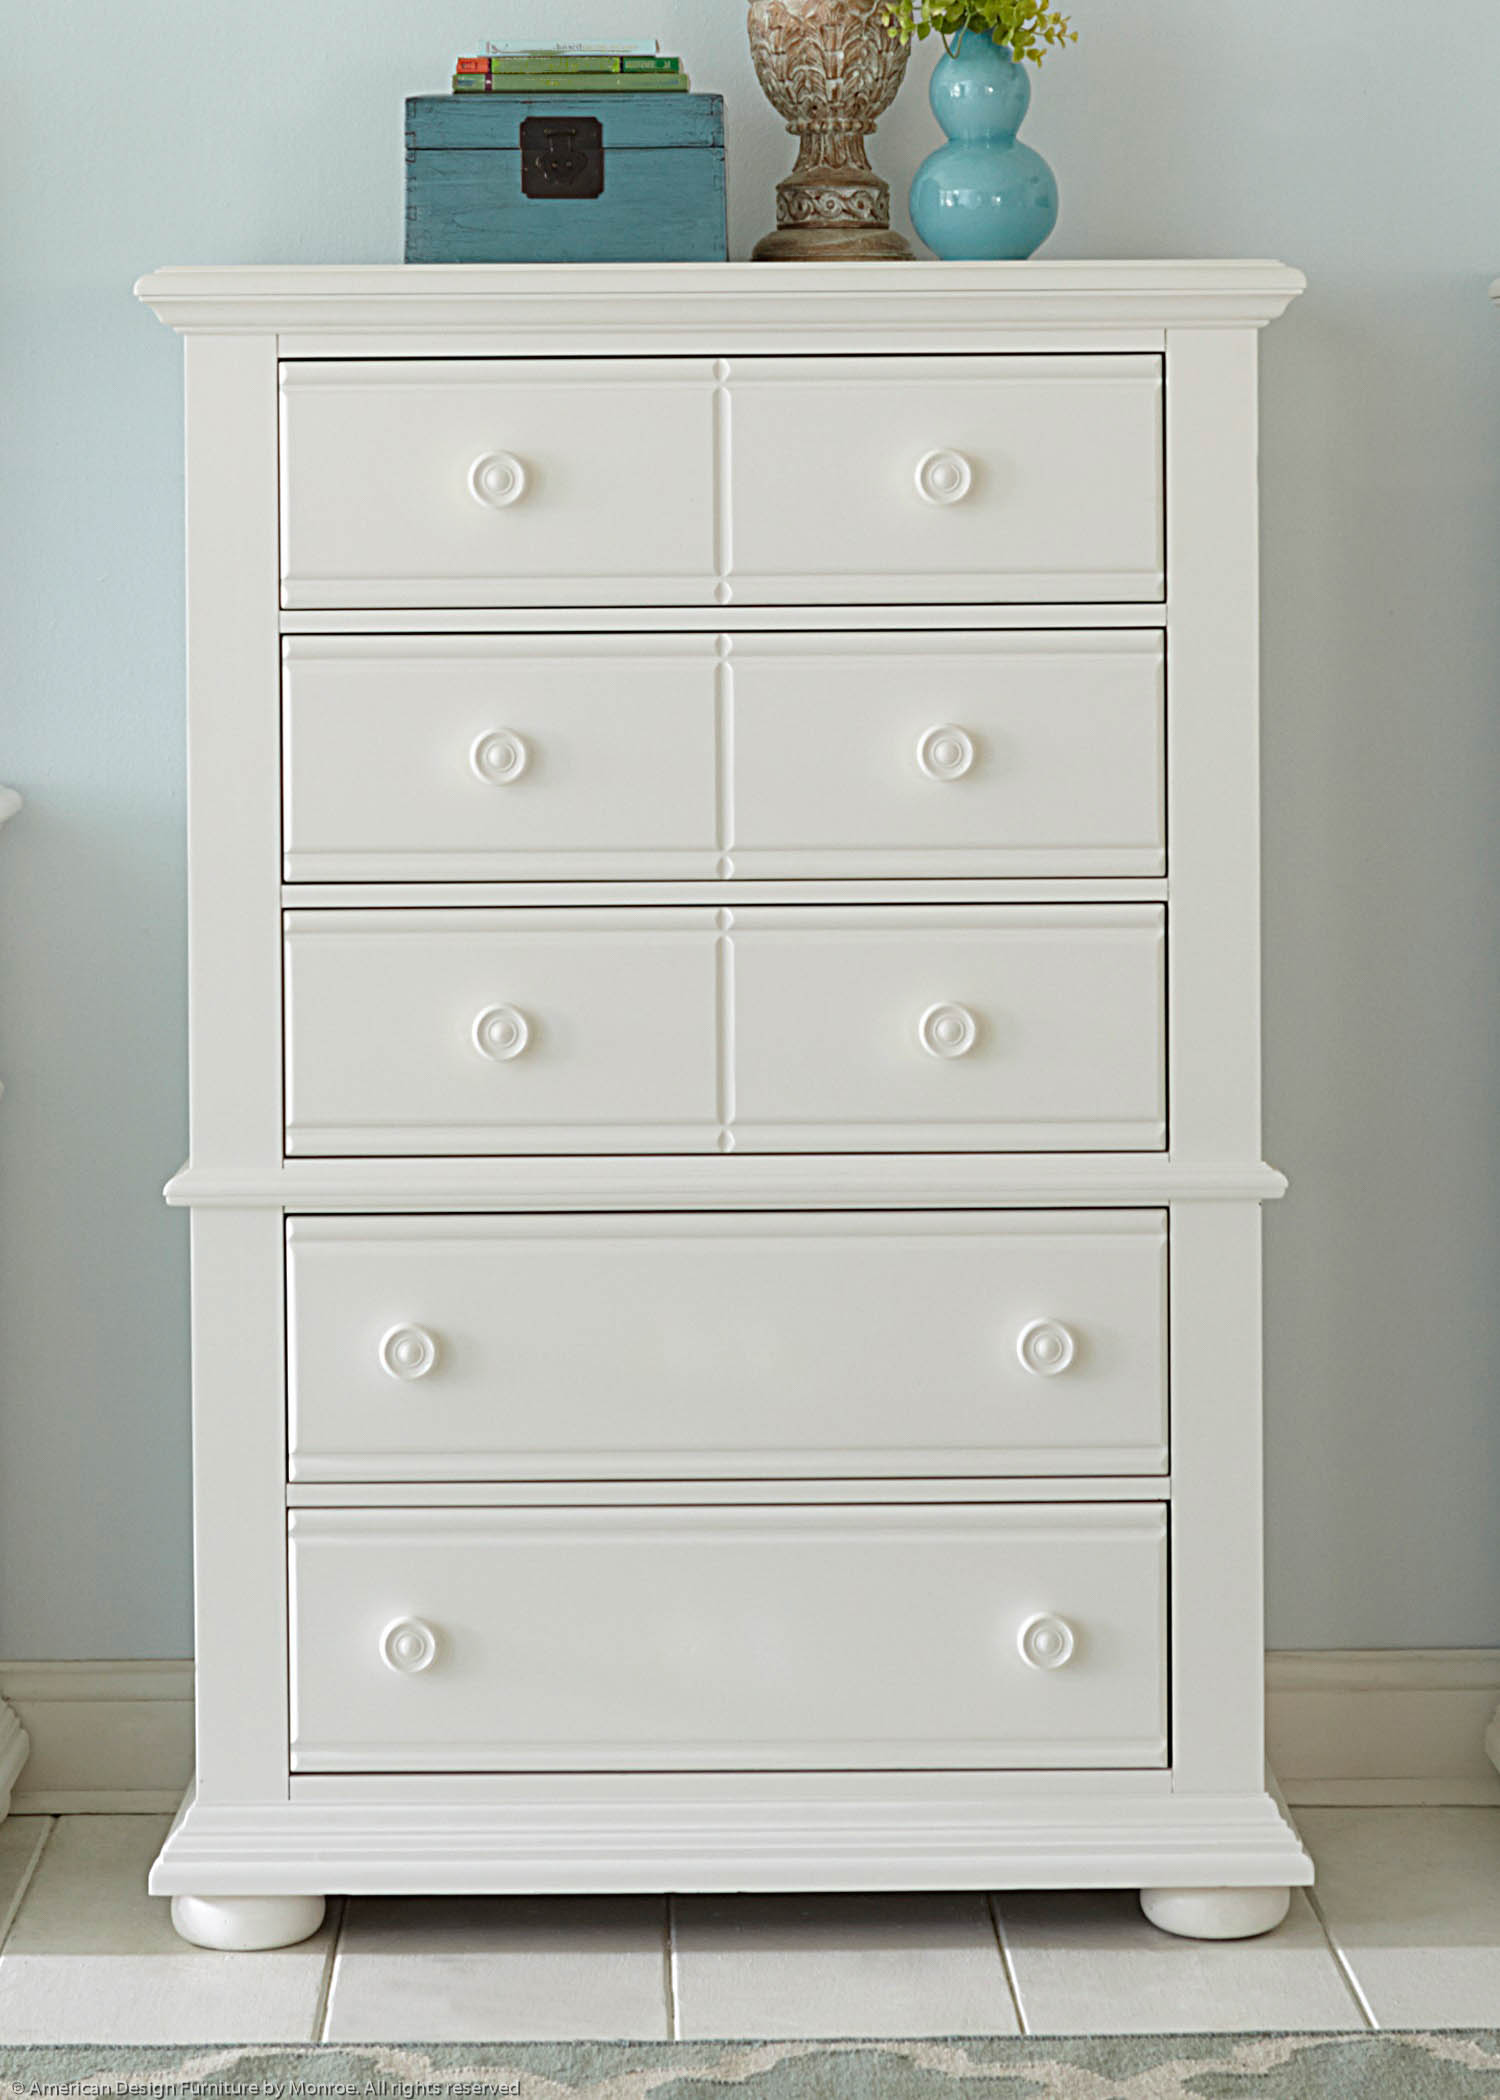 Emerald Isle Chest Pic 1 (Heading 5 Drawer Chest )